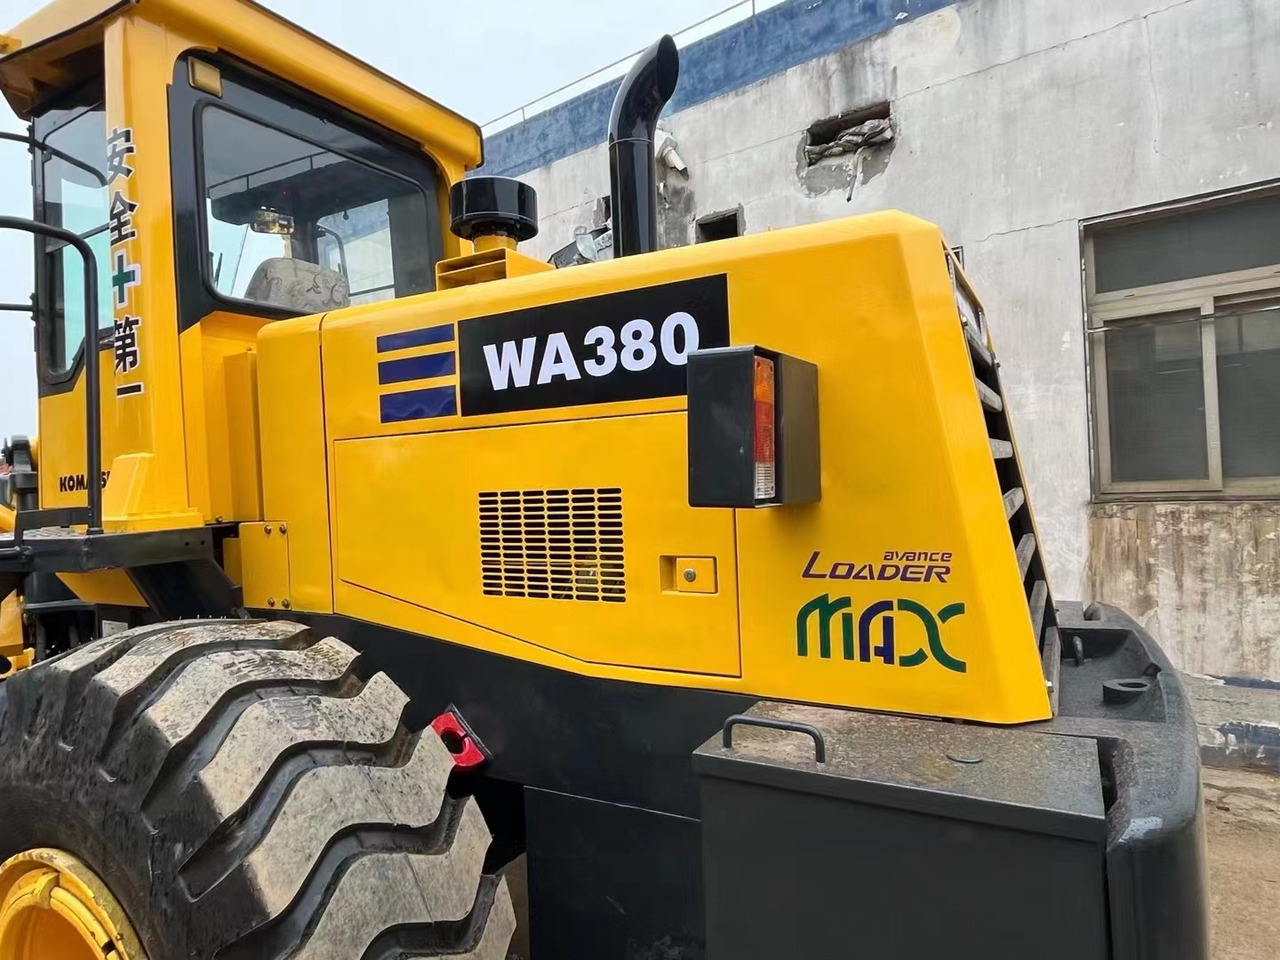 Wiellader KOMATSU WA380 small Used Loader  for sale with cheap price: afbeelding 10